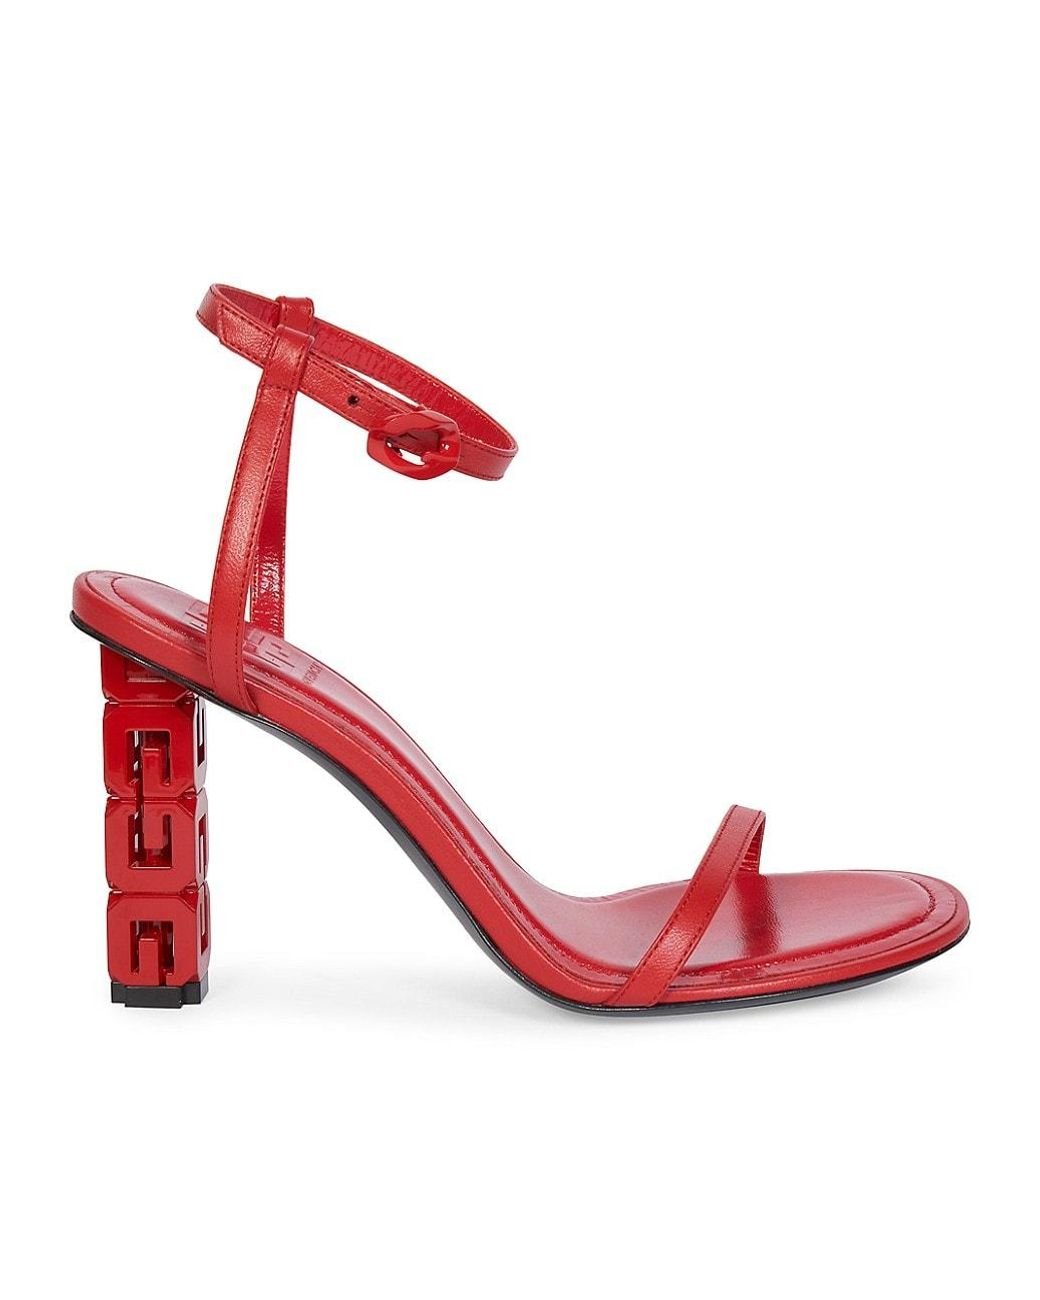 Givenchy G Cube 85 Leather Sandals in Red | Lyst